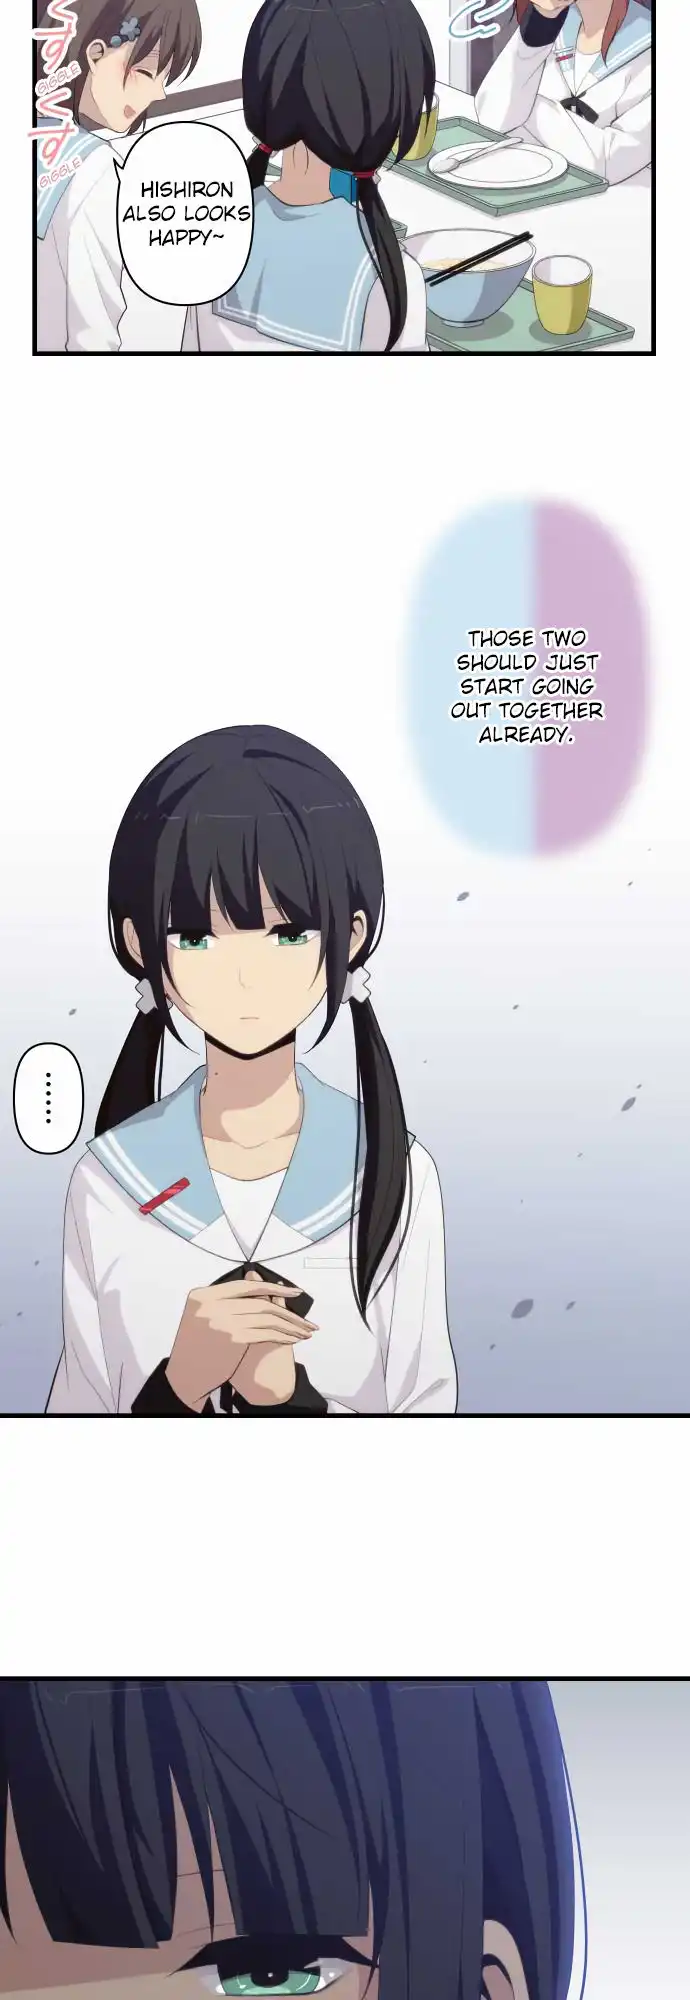 ReLIFE Chapter 178